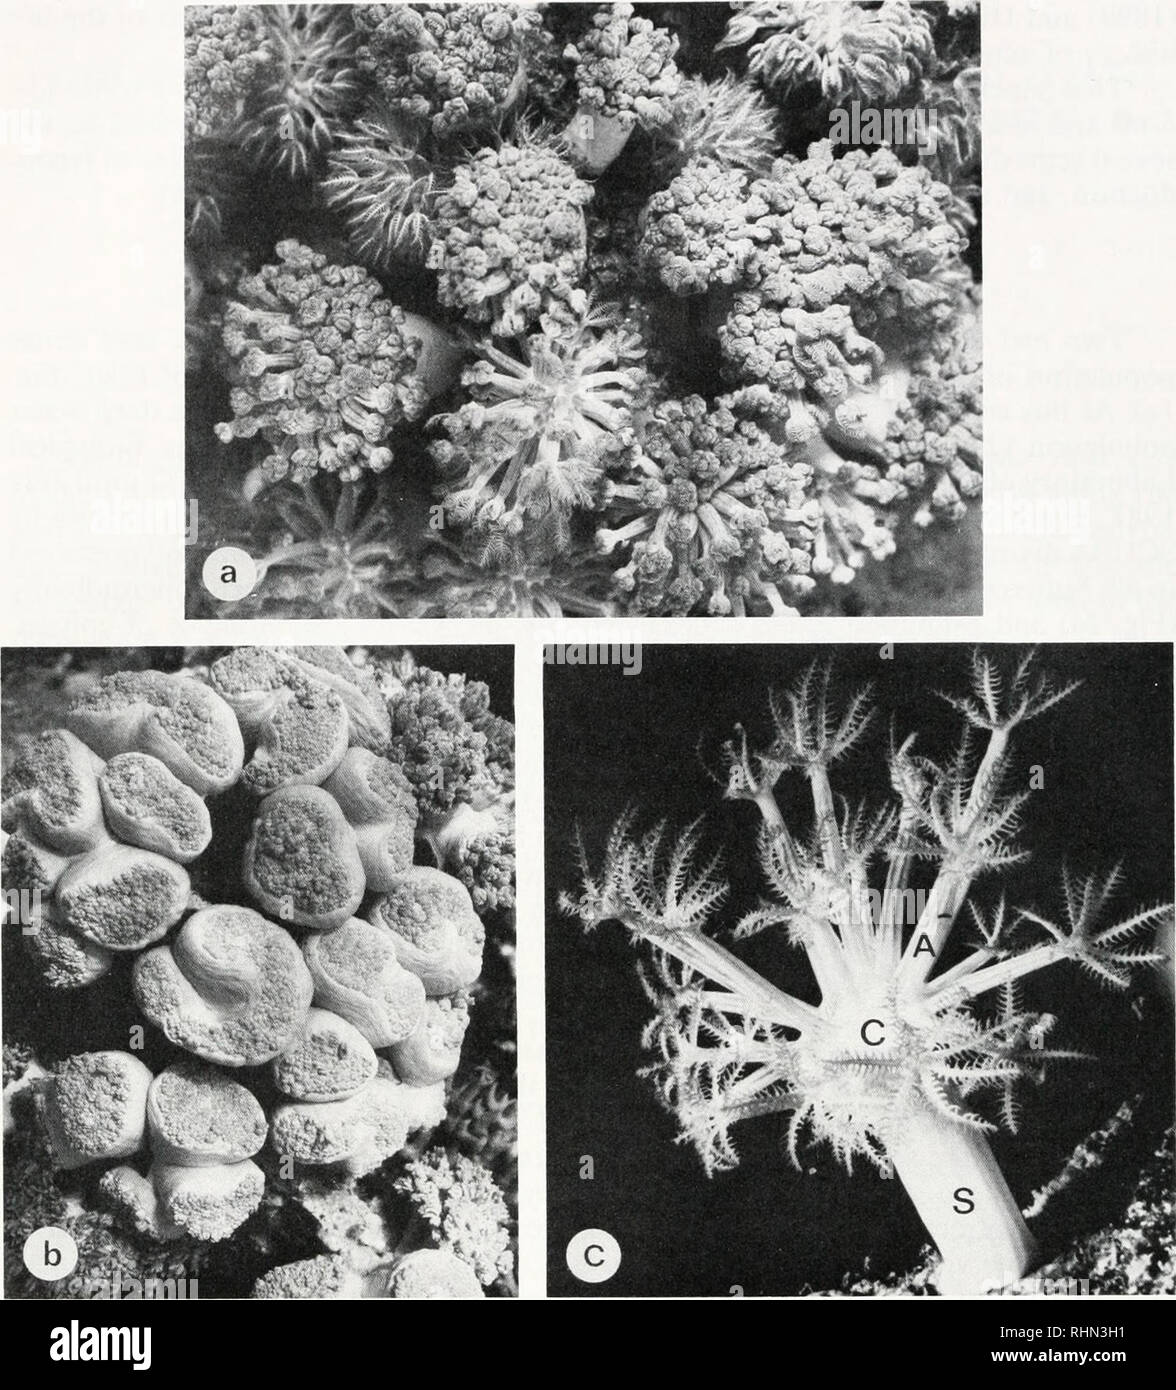 . The Biological bulletin. Biology; Zoology; Biology; Marine Biology. 34 Y. BENAYAHU AND Y. LOYA. FIGURE 1. Colonies of Xenia macrospiculata. a: Aggregation of colonies at the coral reef of Muqebla'. b: Colonies with retracted polyps, c: Colony with extended polyps (X4). Abbreviations: A—anthocodium, C—capitulum, S—stalk. X. macrospiculata colonies are dioecious. Hermaphroditic colonies are very rare; among more than 2000 colonies examined, only three bore both sperm sacs and oocytes. The gonads are arranged along the four lateral and two sulcal mesenteries (Fig. 2b), except for the anthocodia Stock Photo